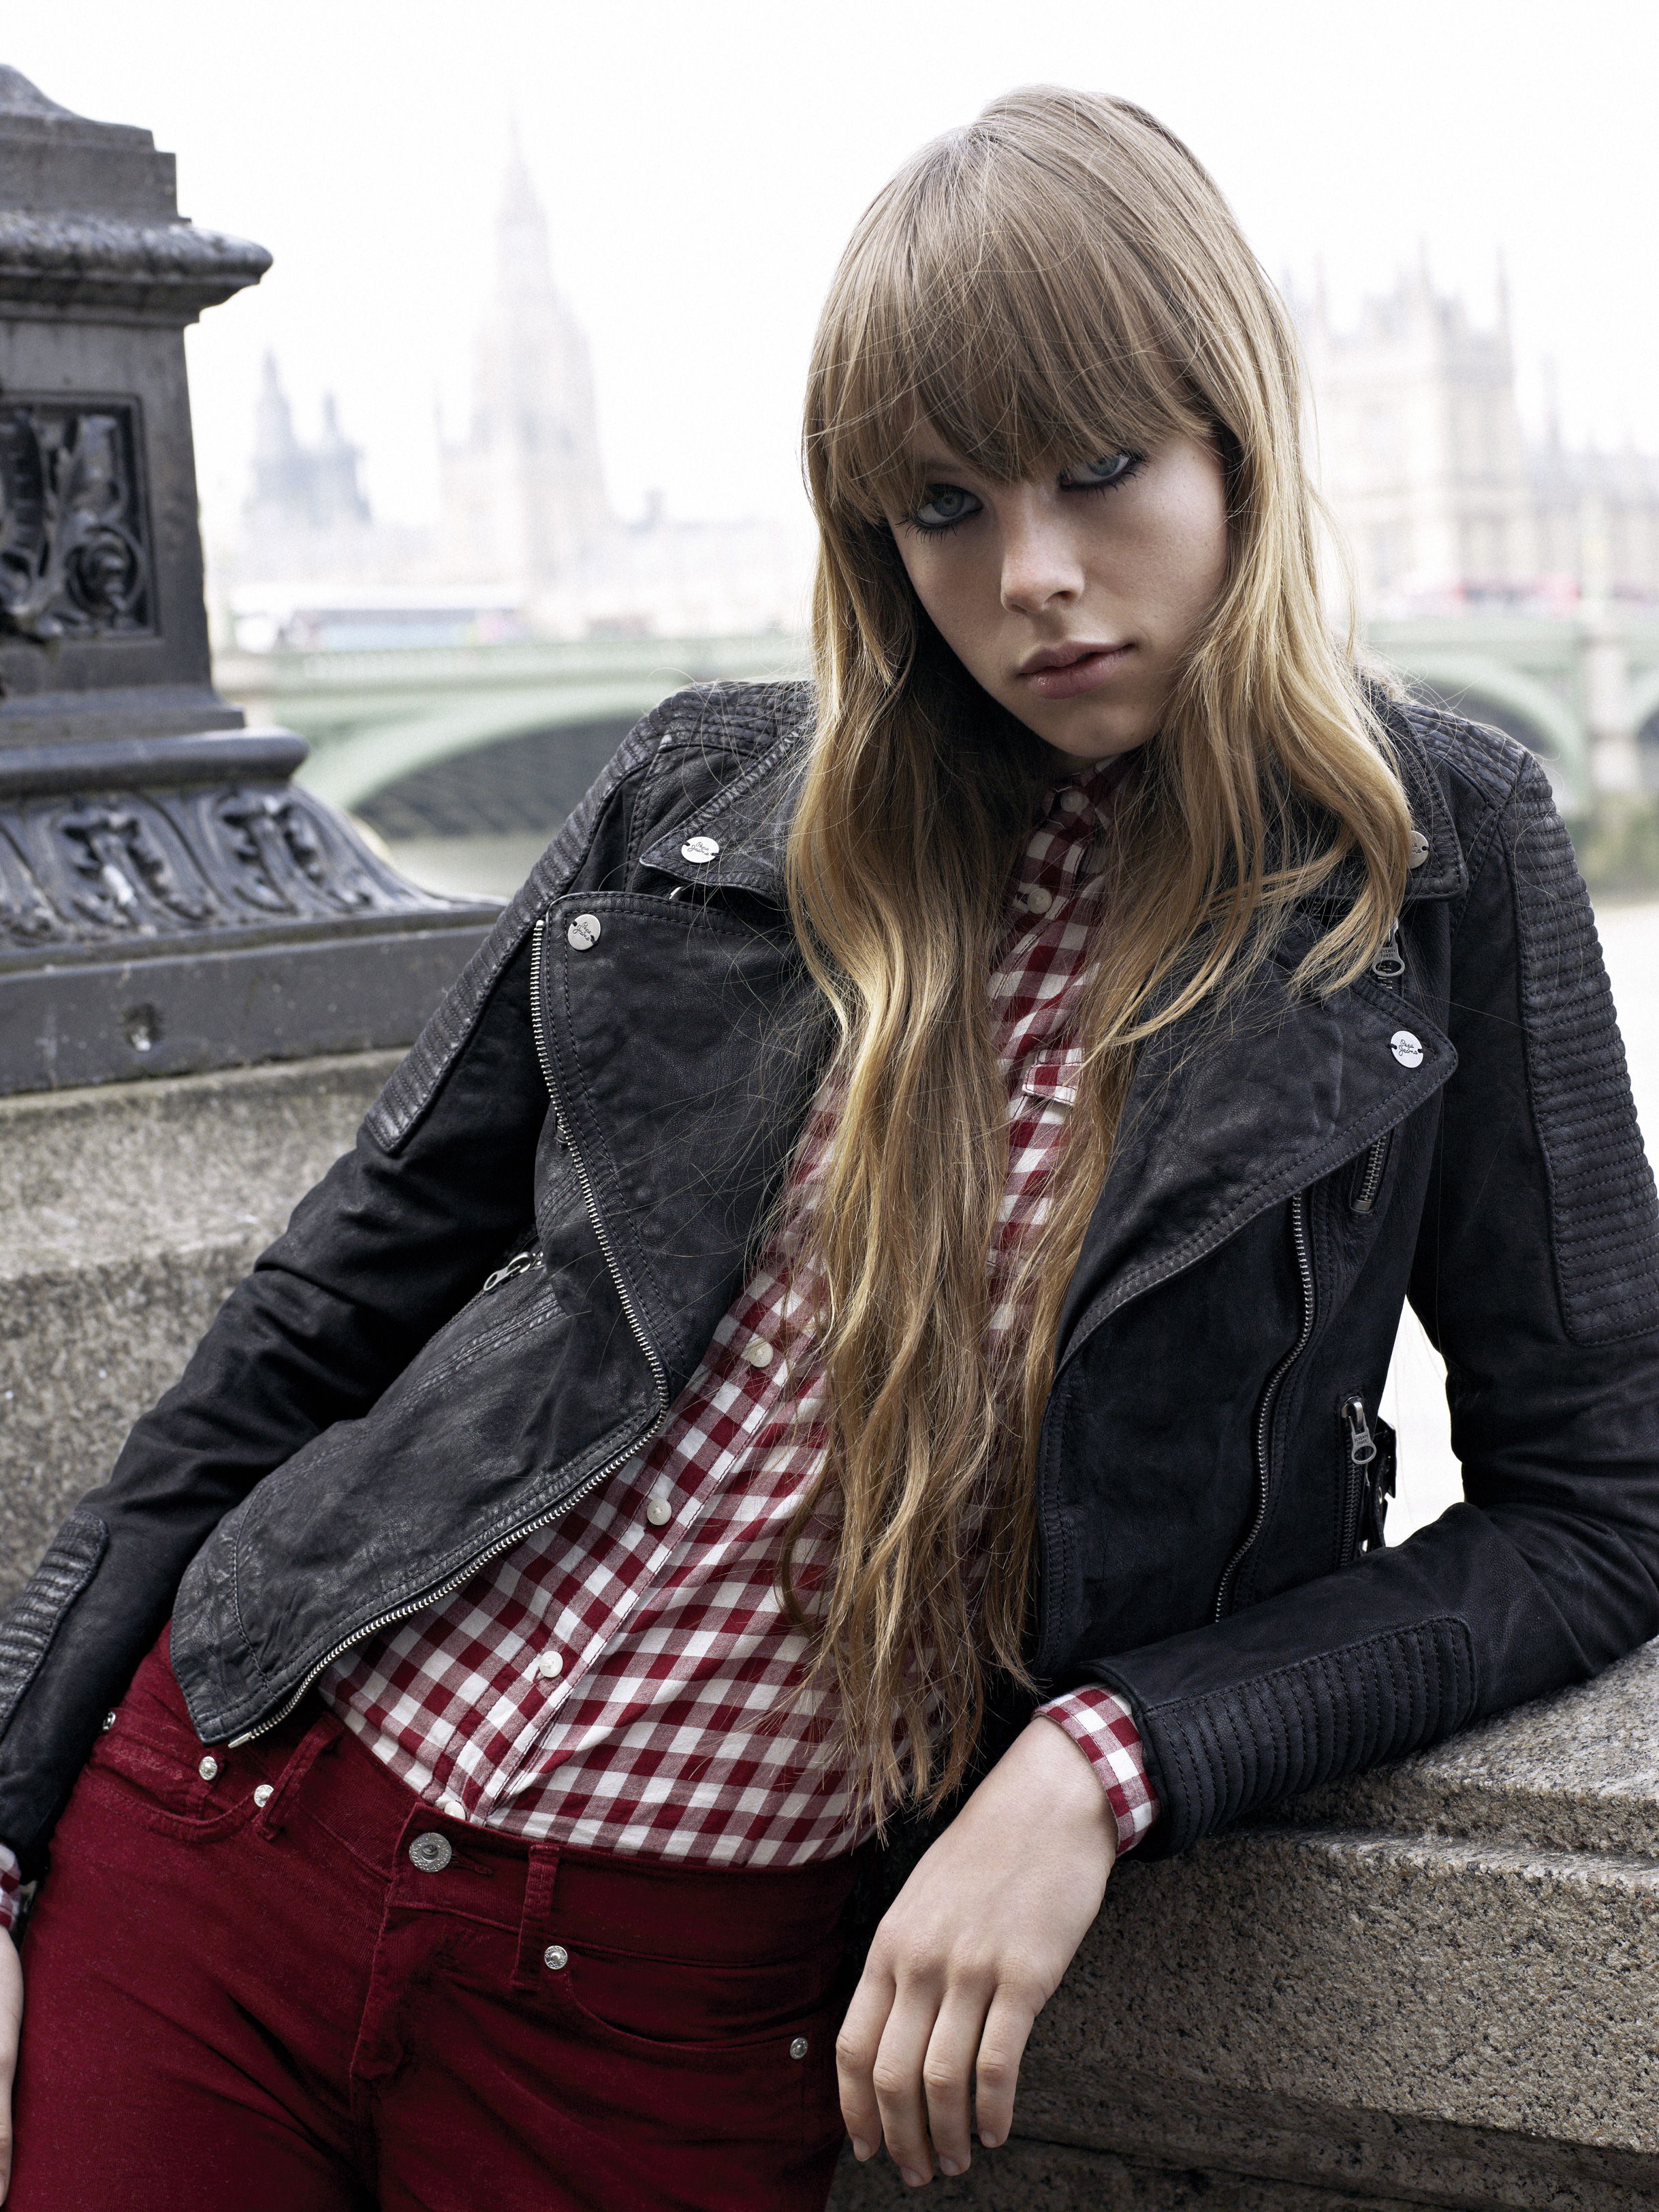 Pepe Jeans AW 2012 Ad Campaign 2